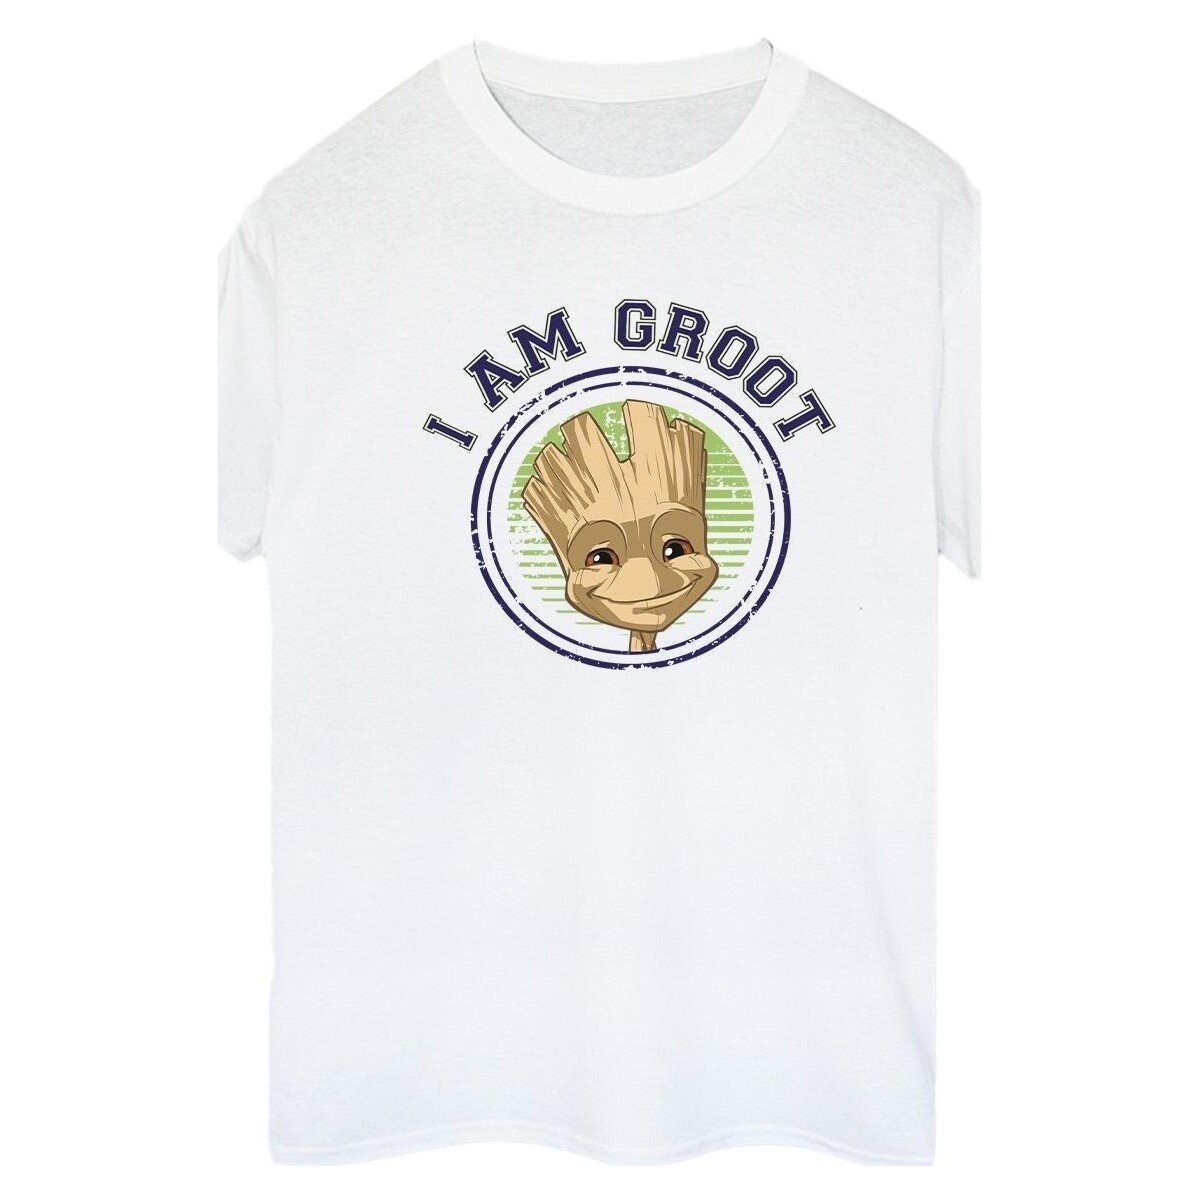 Abbigliamento Donna T-shirts a maniche lunghe Guardians Of The Galaxy Groot Varsity Bianco